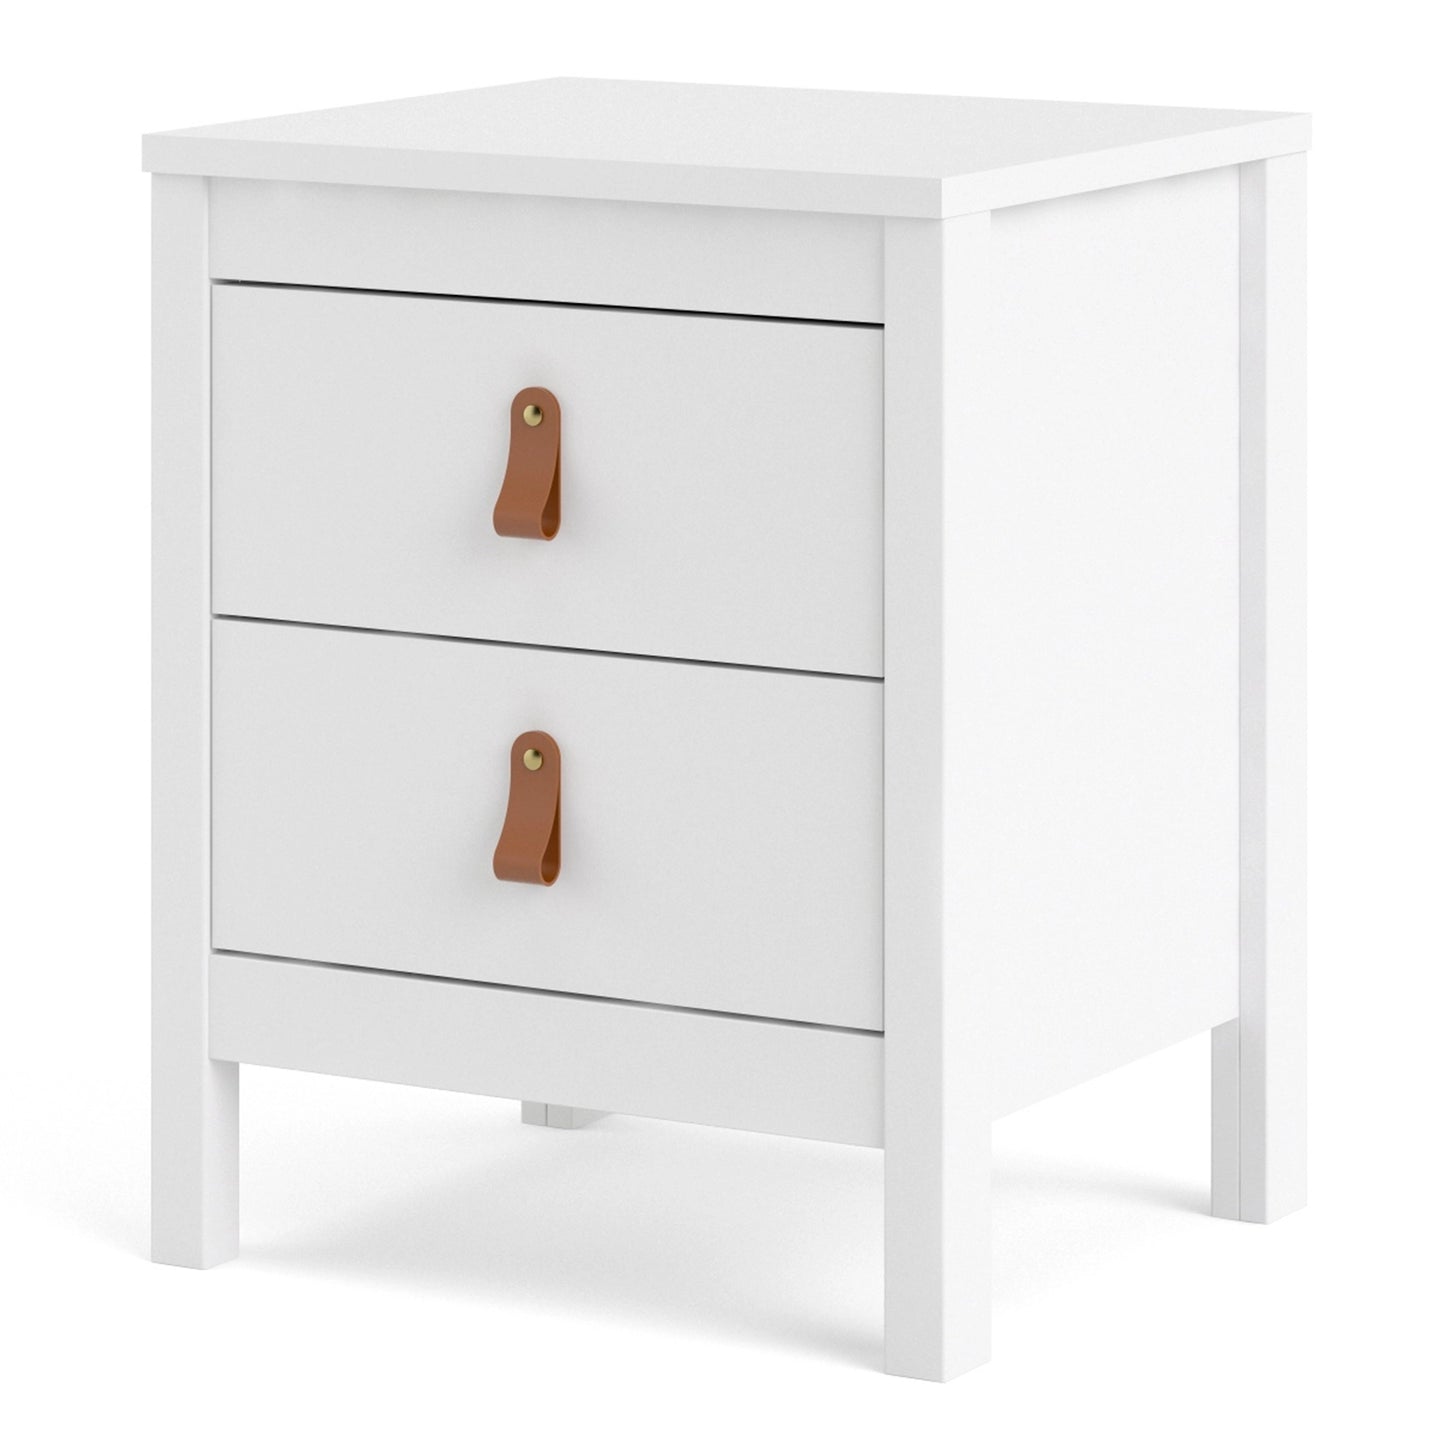 Furniture To Go Barcelona Bedside Table 2 Drawers in White